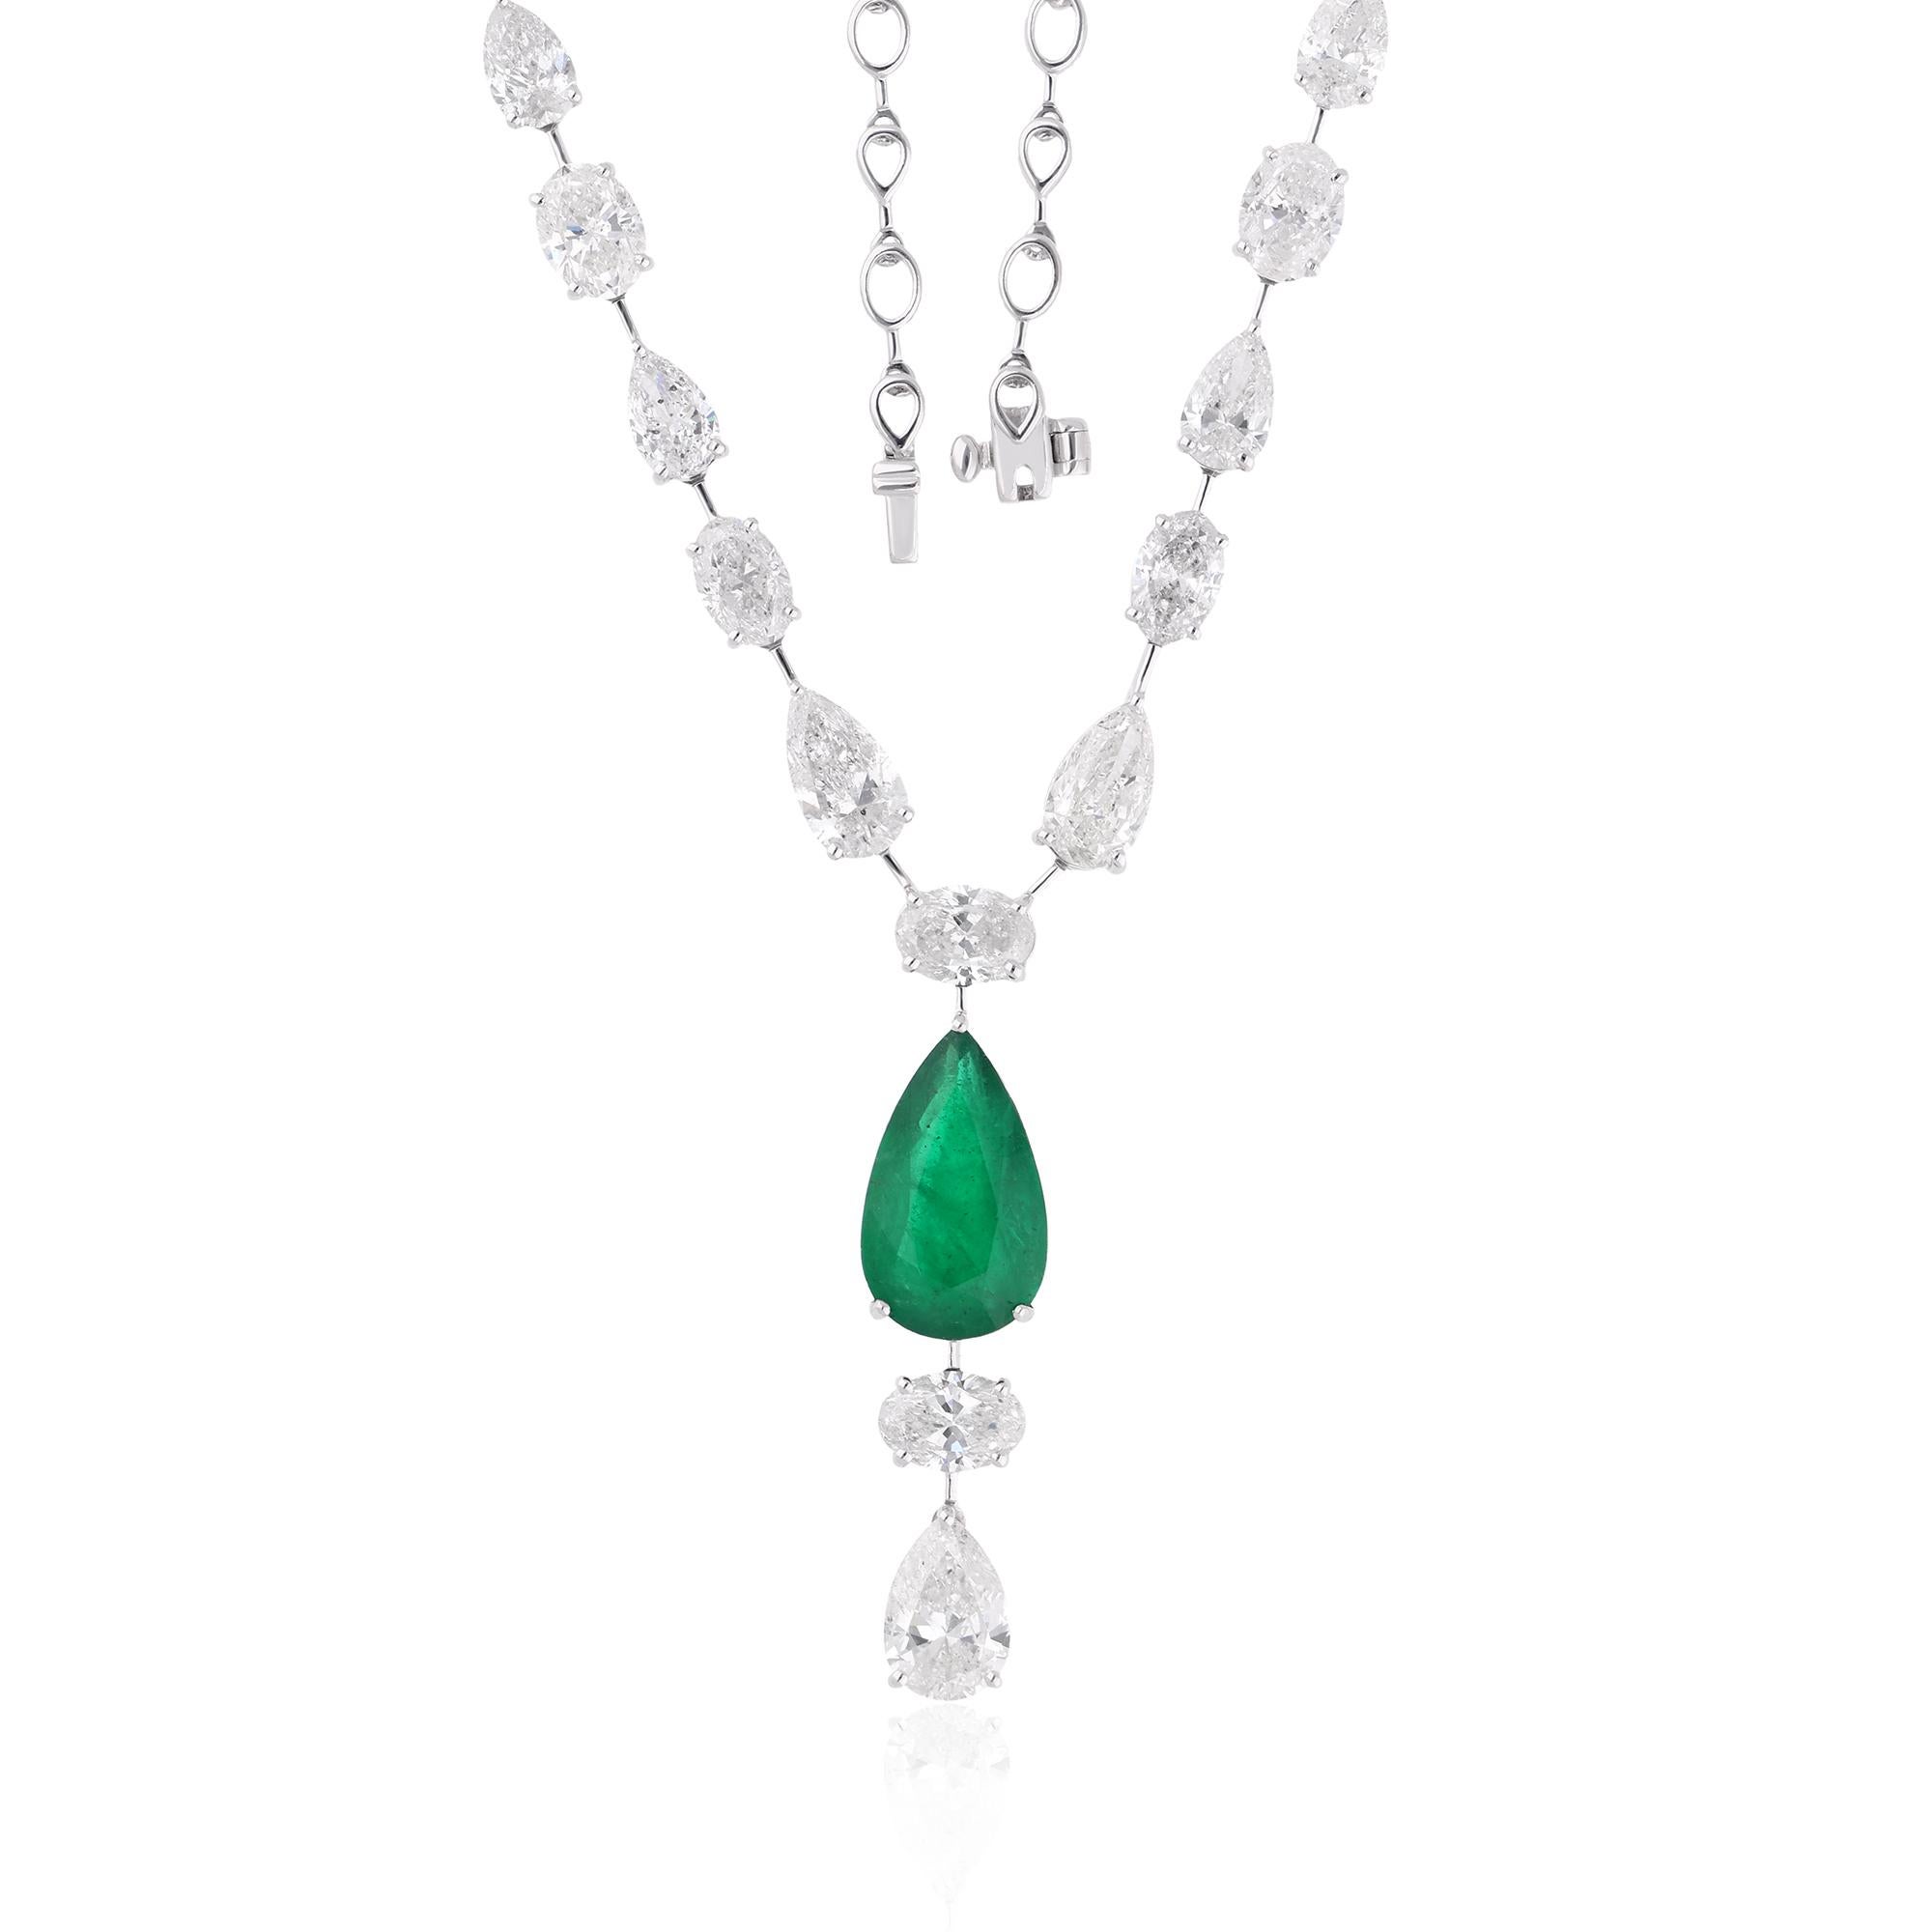 Surrounding the emerald charm are dazzling diamonds, meticulously set to accentuate its beauty and amplify its radiance. Each diamond is hand-selected for its exceptional quality and brilliance, ensuring a captivating display of sparkle with every